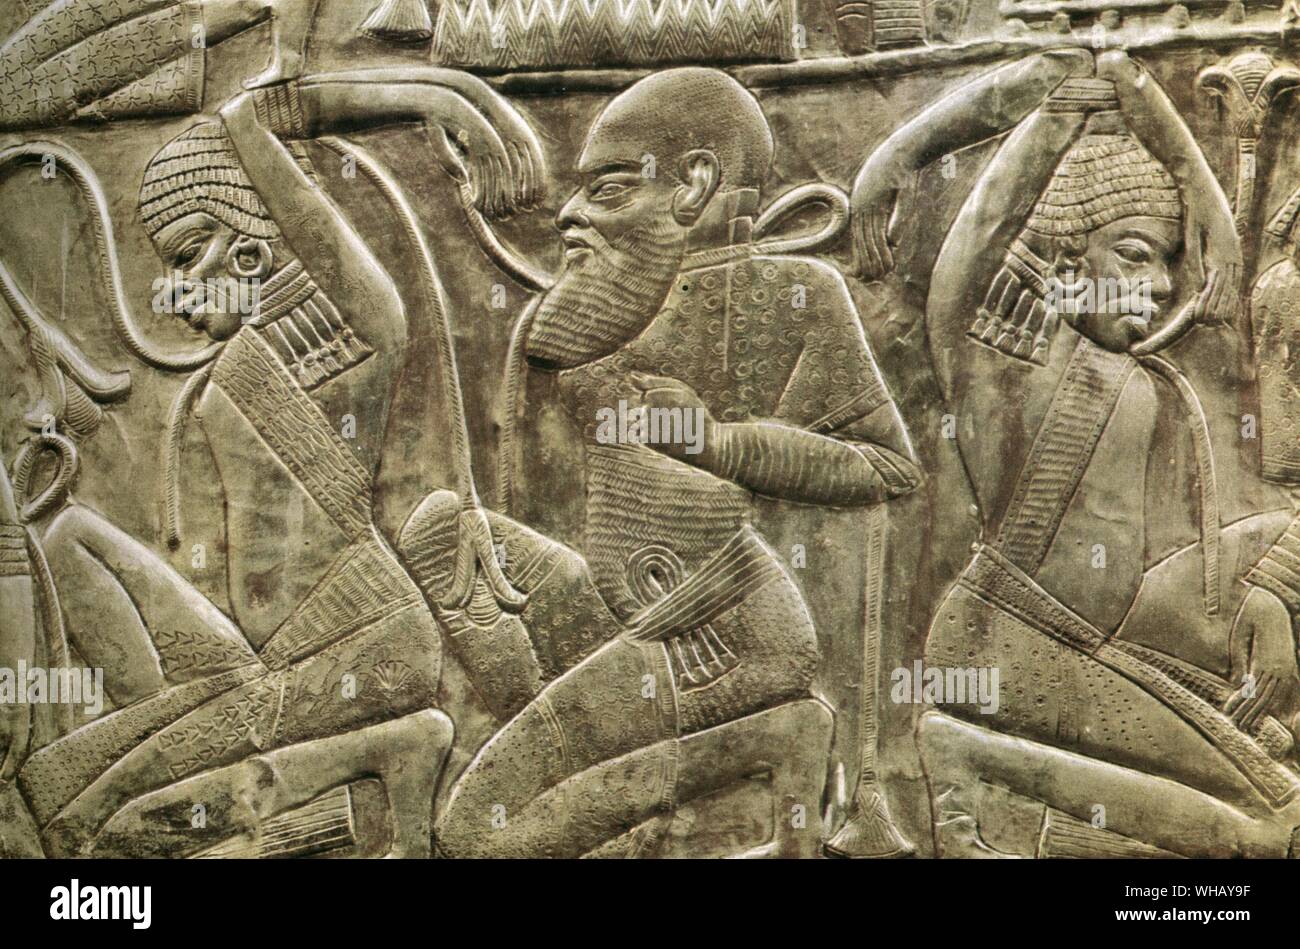 Detail from the inside of one of the state chariots. The enemies of Egypt vanquished and enslaved. Tukankhamen, by Christiane Desroches Noblecourt, page 91. Stock Photo